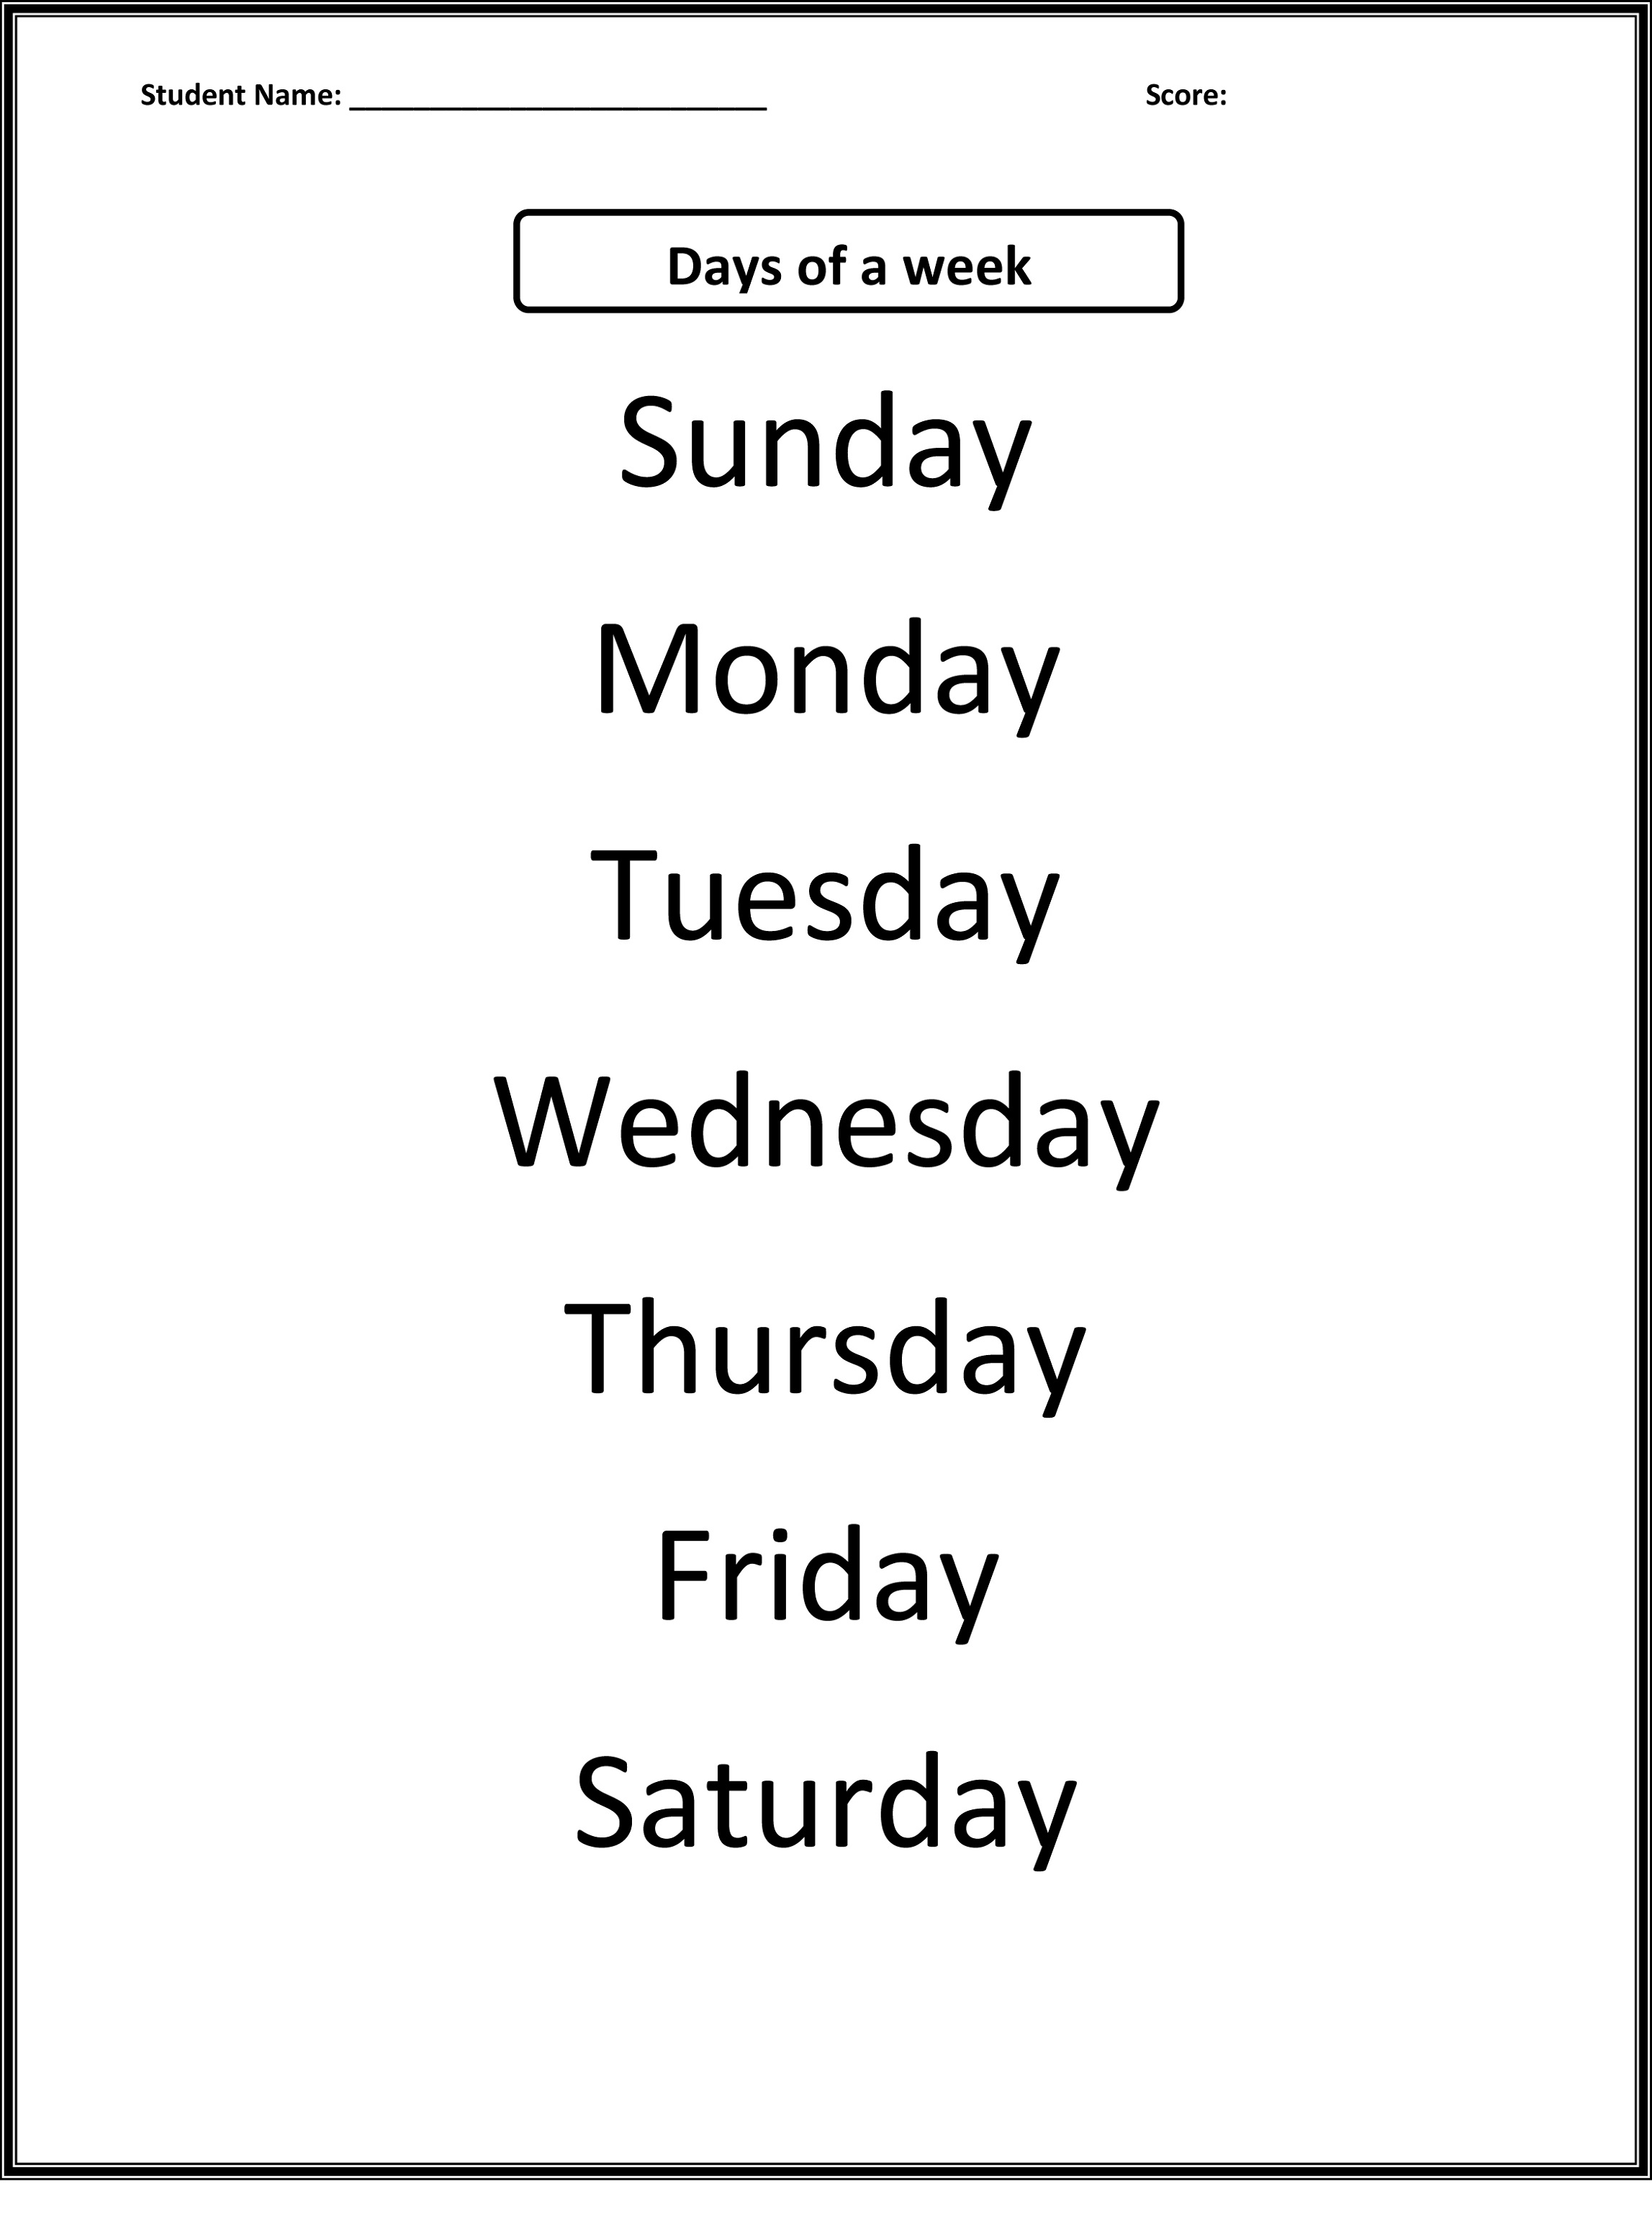 worksheets for days of the week printable